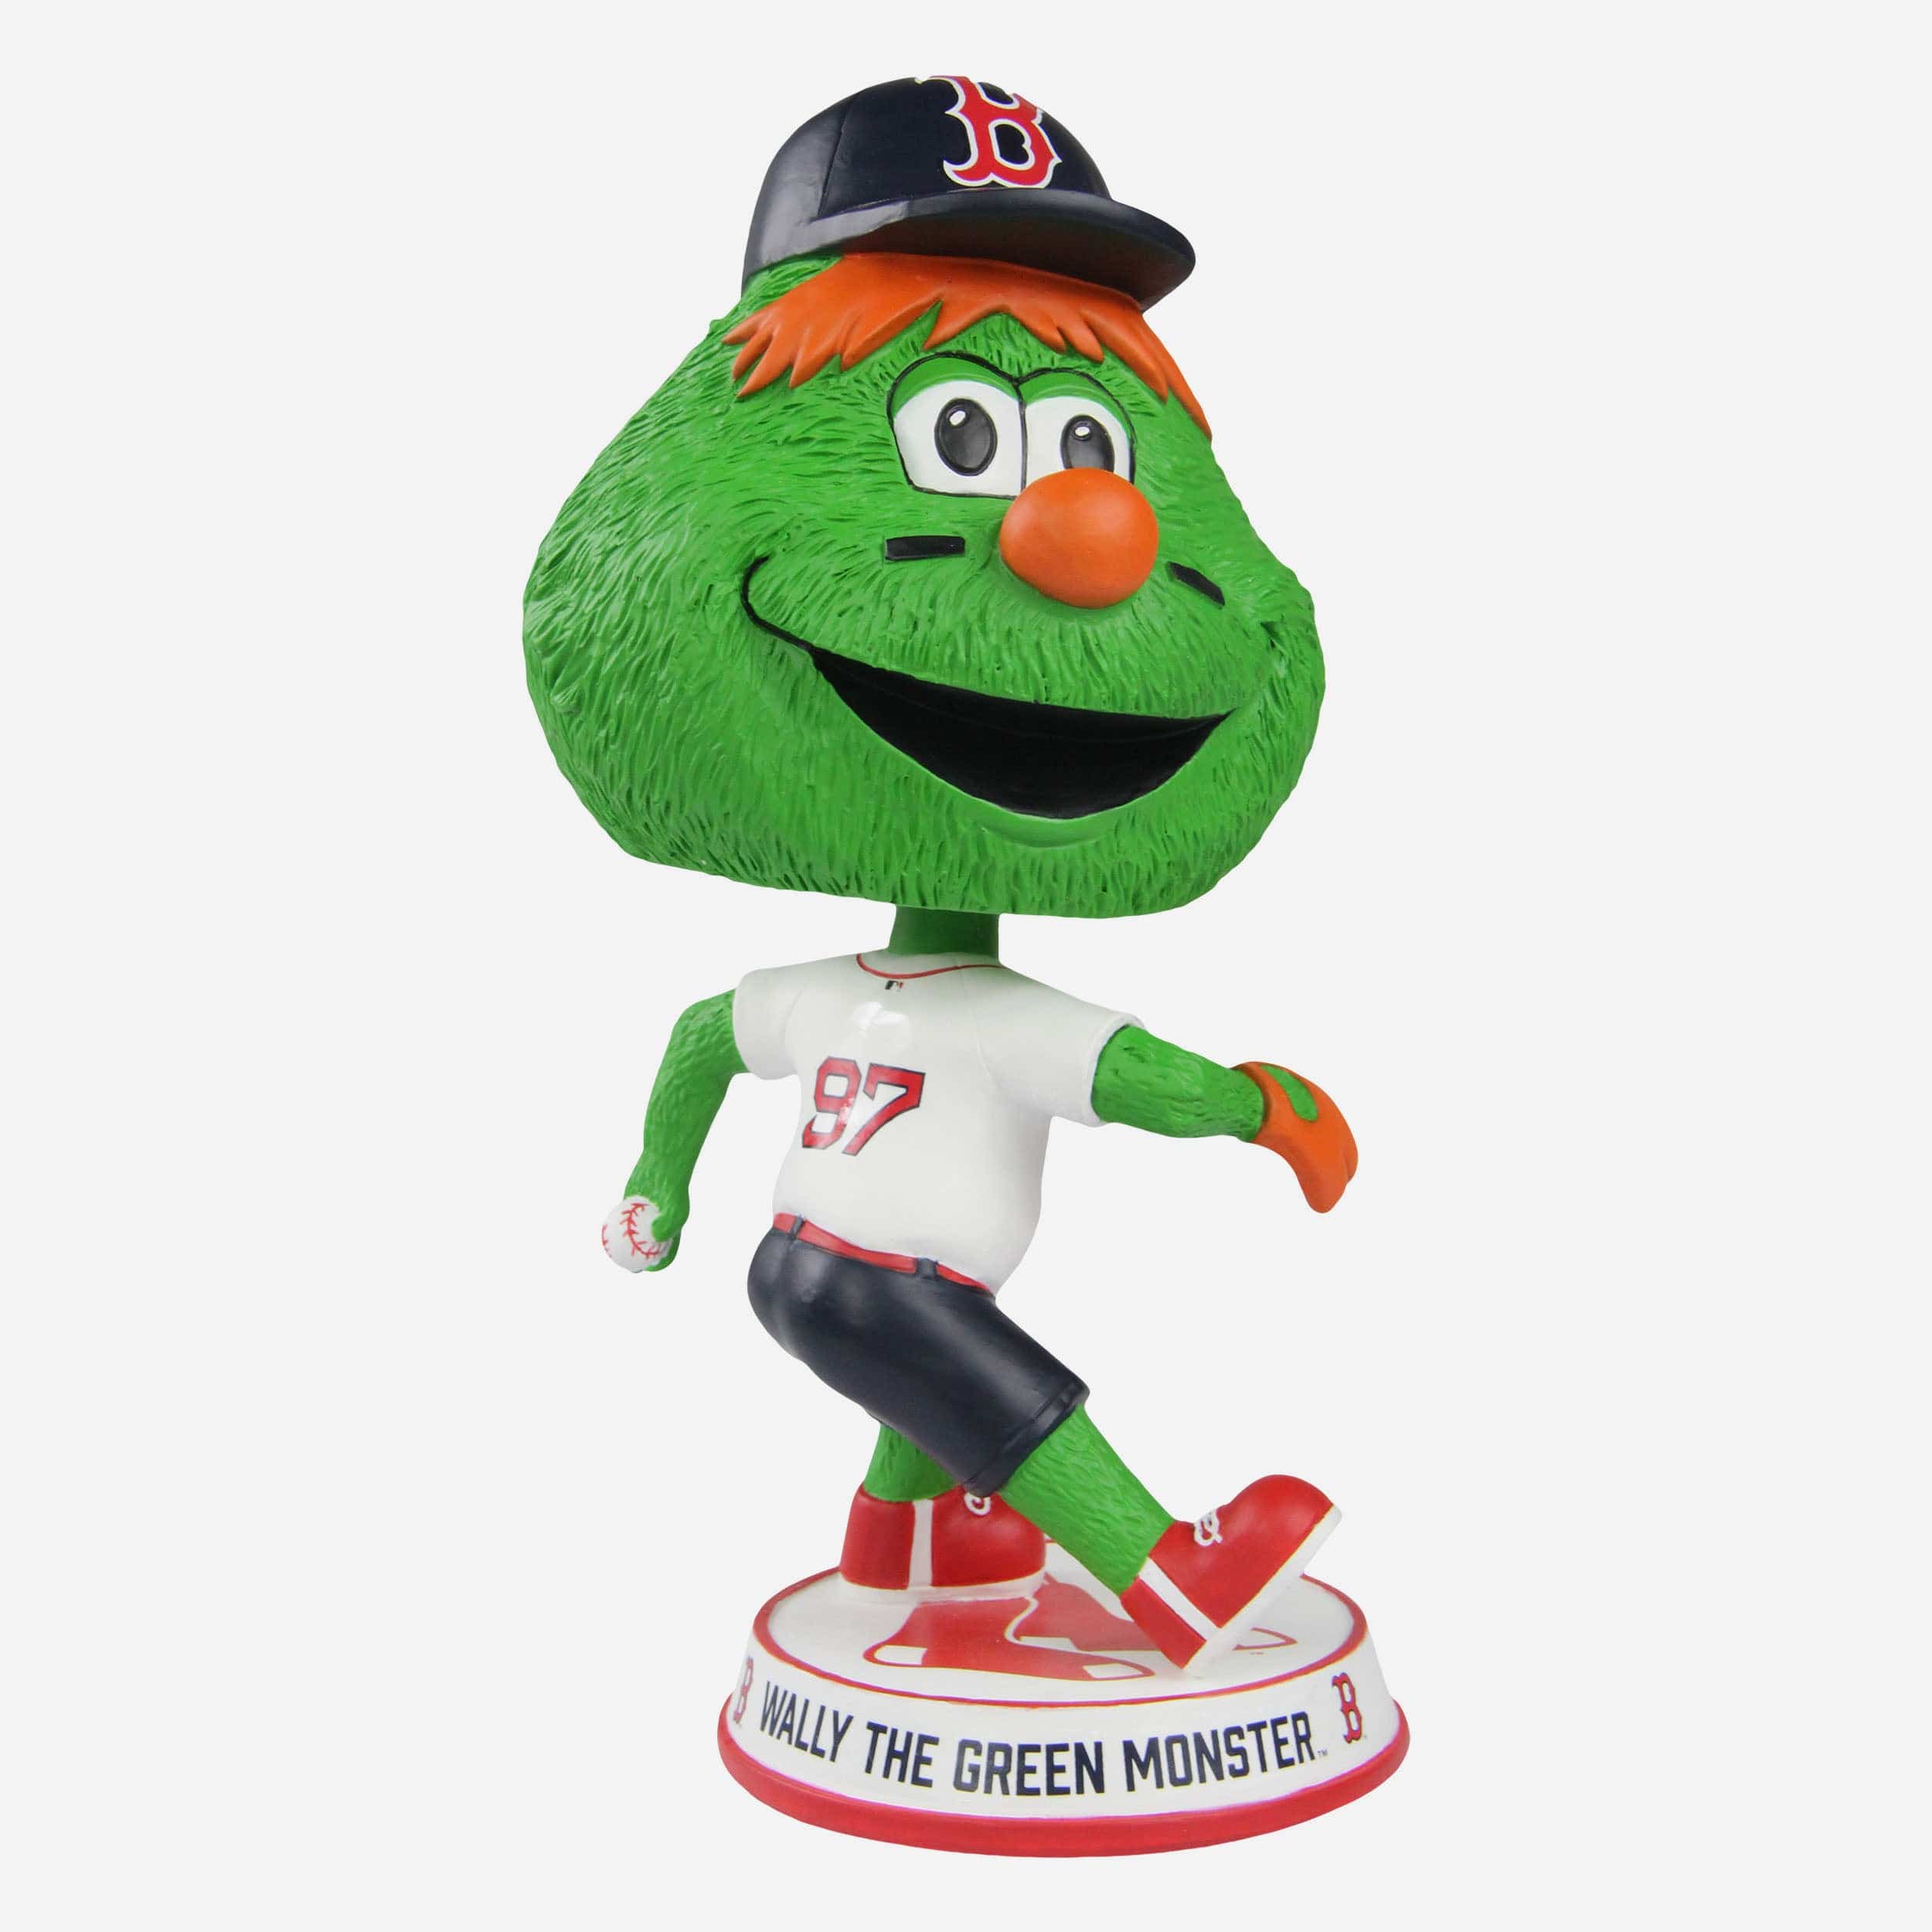 Wally The Green Monster Boston Red Sox Mascot Bighead Bobblehead Officially Licensed by MLB